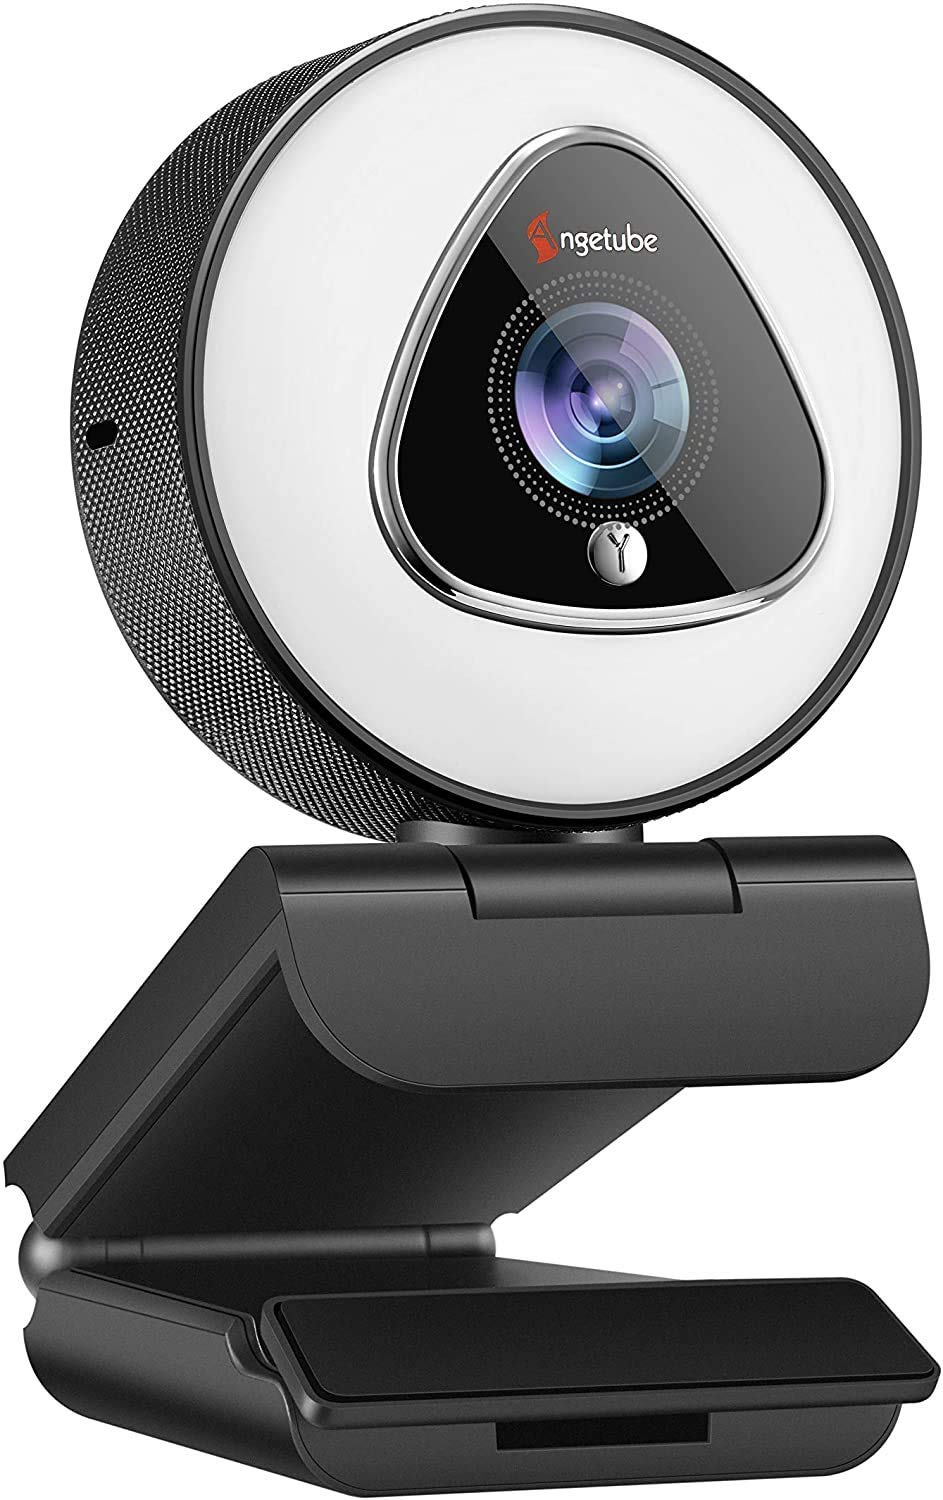  [AUSTRALIA] - Streaming Webcam with Light - 1080P Autofocus HD USB Gaming Web Camera with Microphone for Computer Laptop Angetube Digital Zoom PC Camera for Desktop|Mac|Windows|Xbox|Twitch|Skype|Google Meet|Zoom